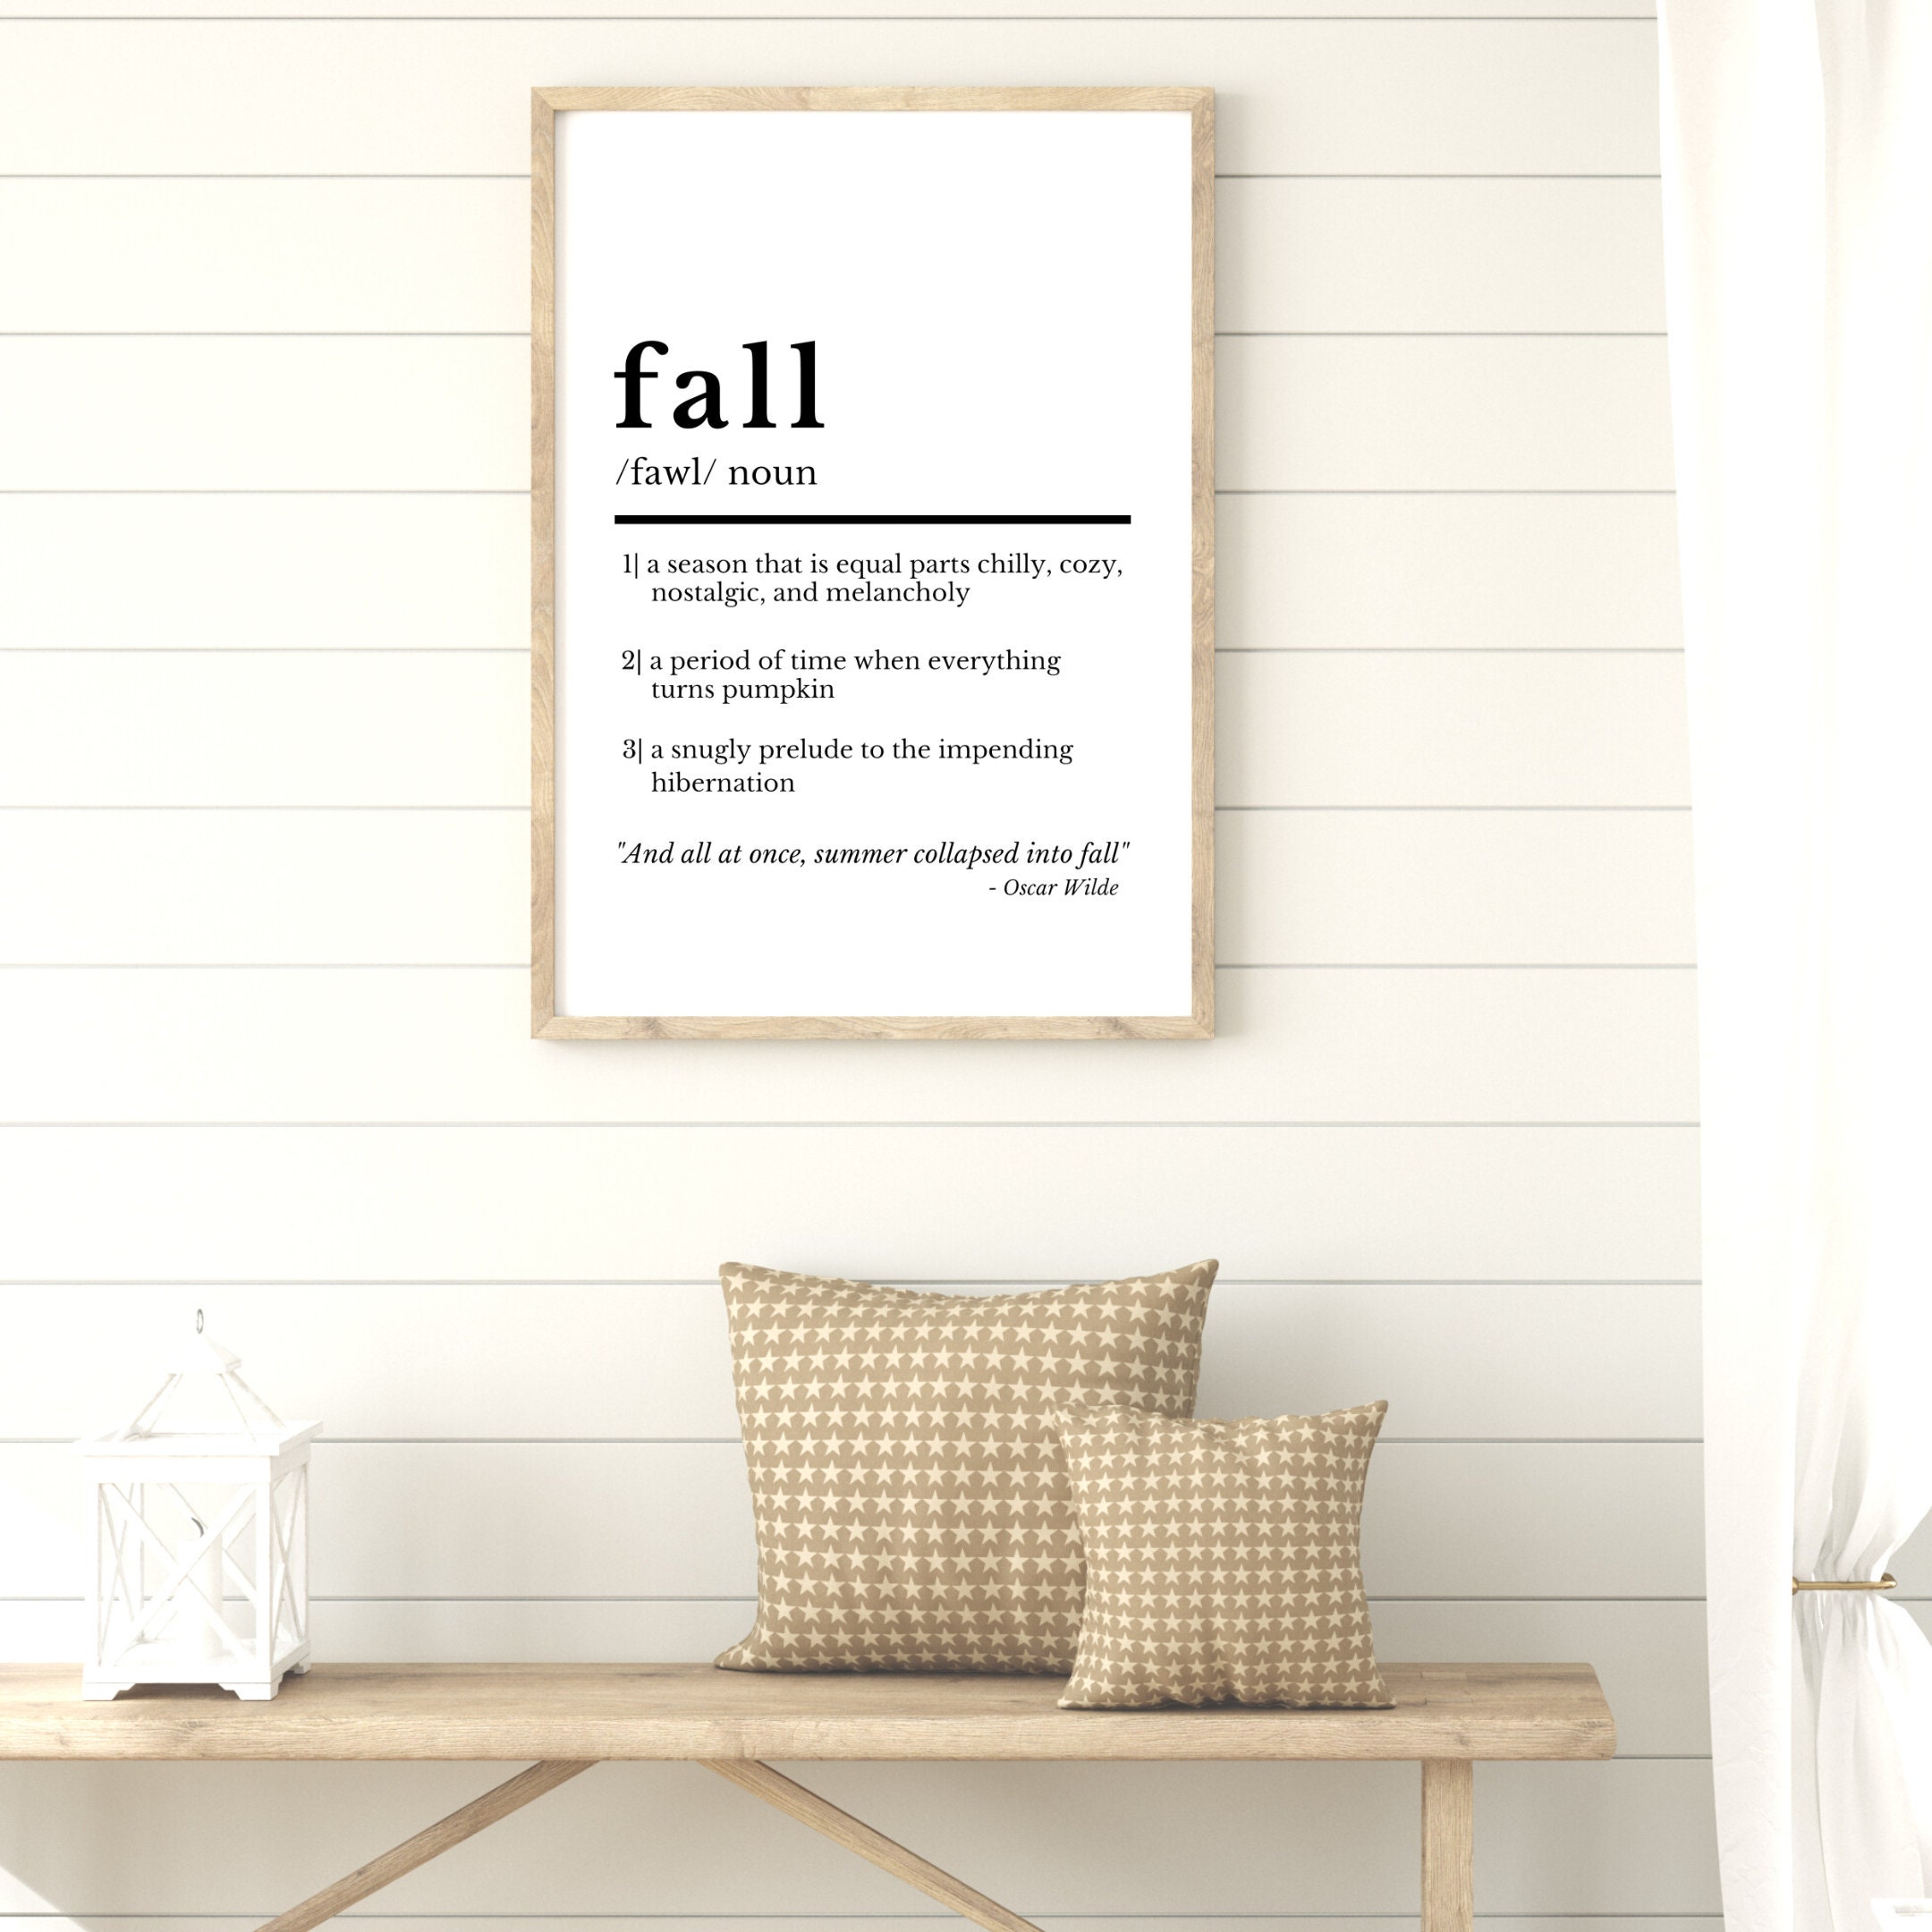 Rage - Quit Definition Dictionary Word Meaning Wall Prints Canvas Wall Art  with Saying Farmhouse Wall Art Painting Modern Wall Decor for Home School